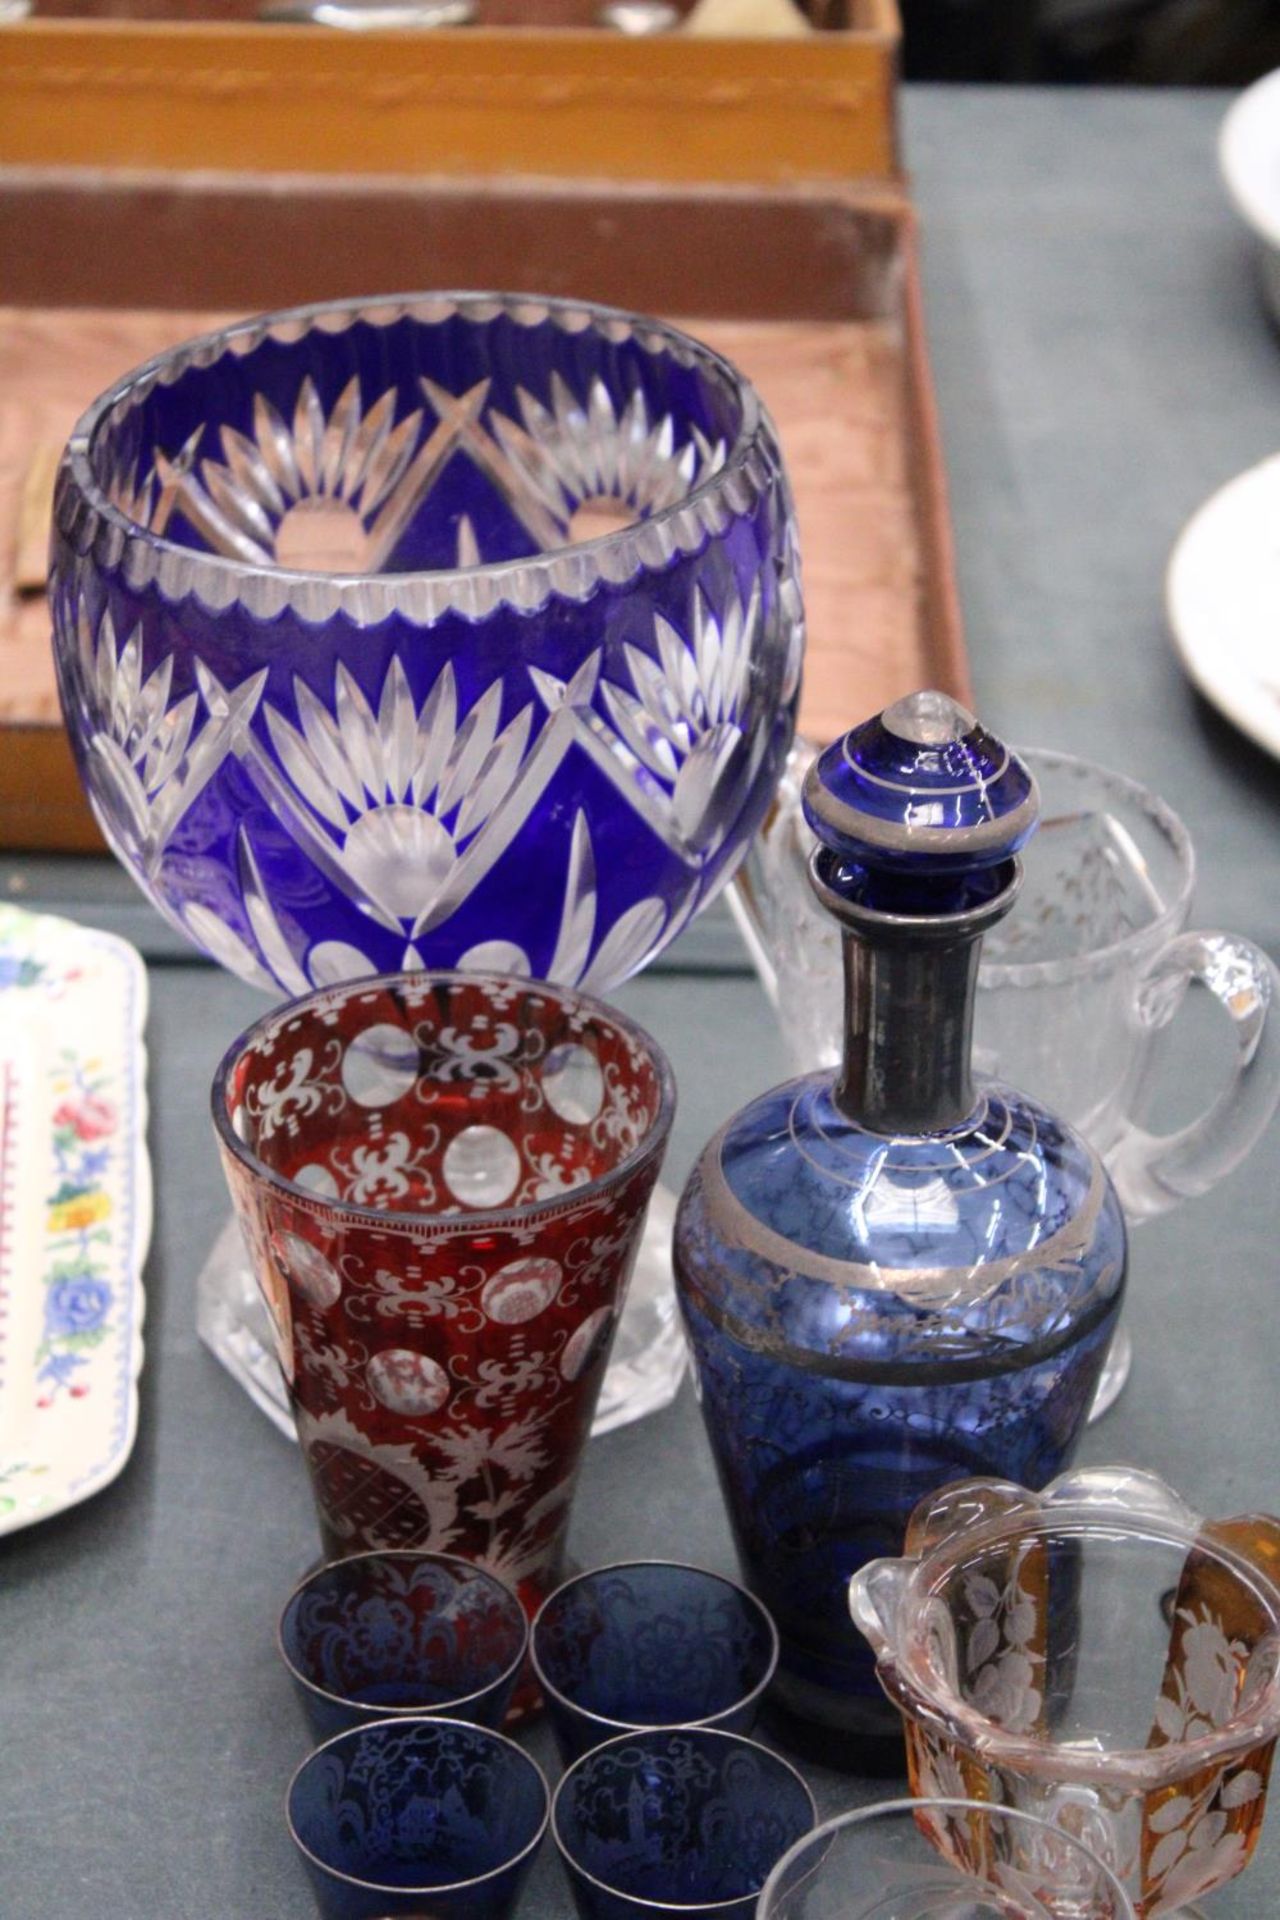 A MIXED LOT OF GLASSWARE TO INCLUDE A BLUE BOHEMIAN STYLE VASE, CRANBERRY JUG, SIX SHOT GLASSES ETC - Image 2 of 5